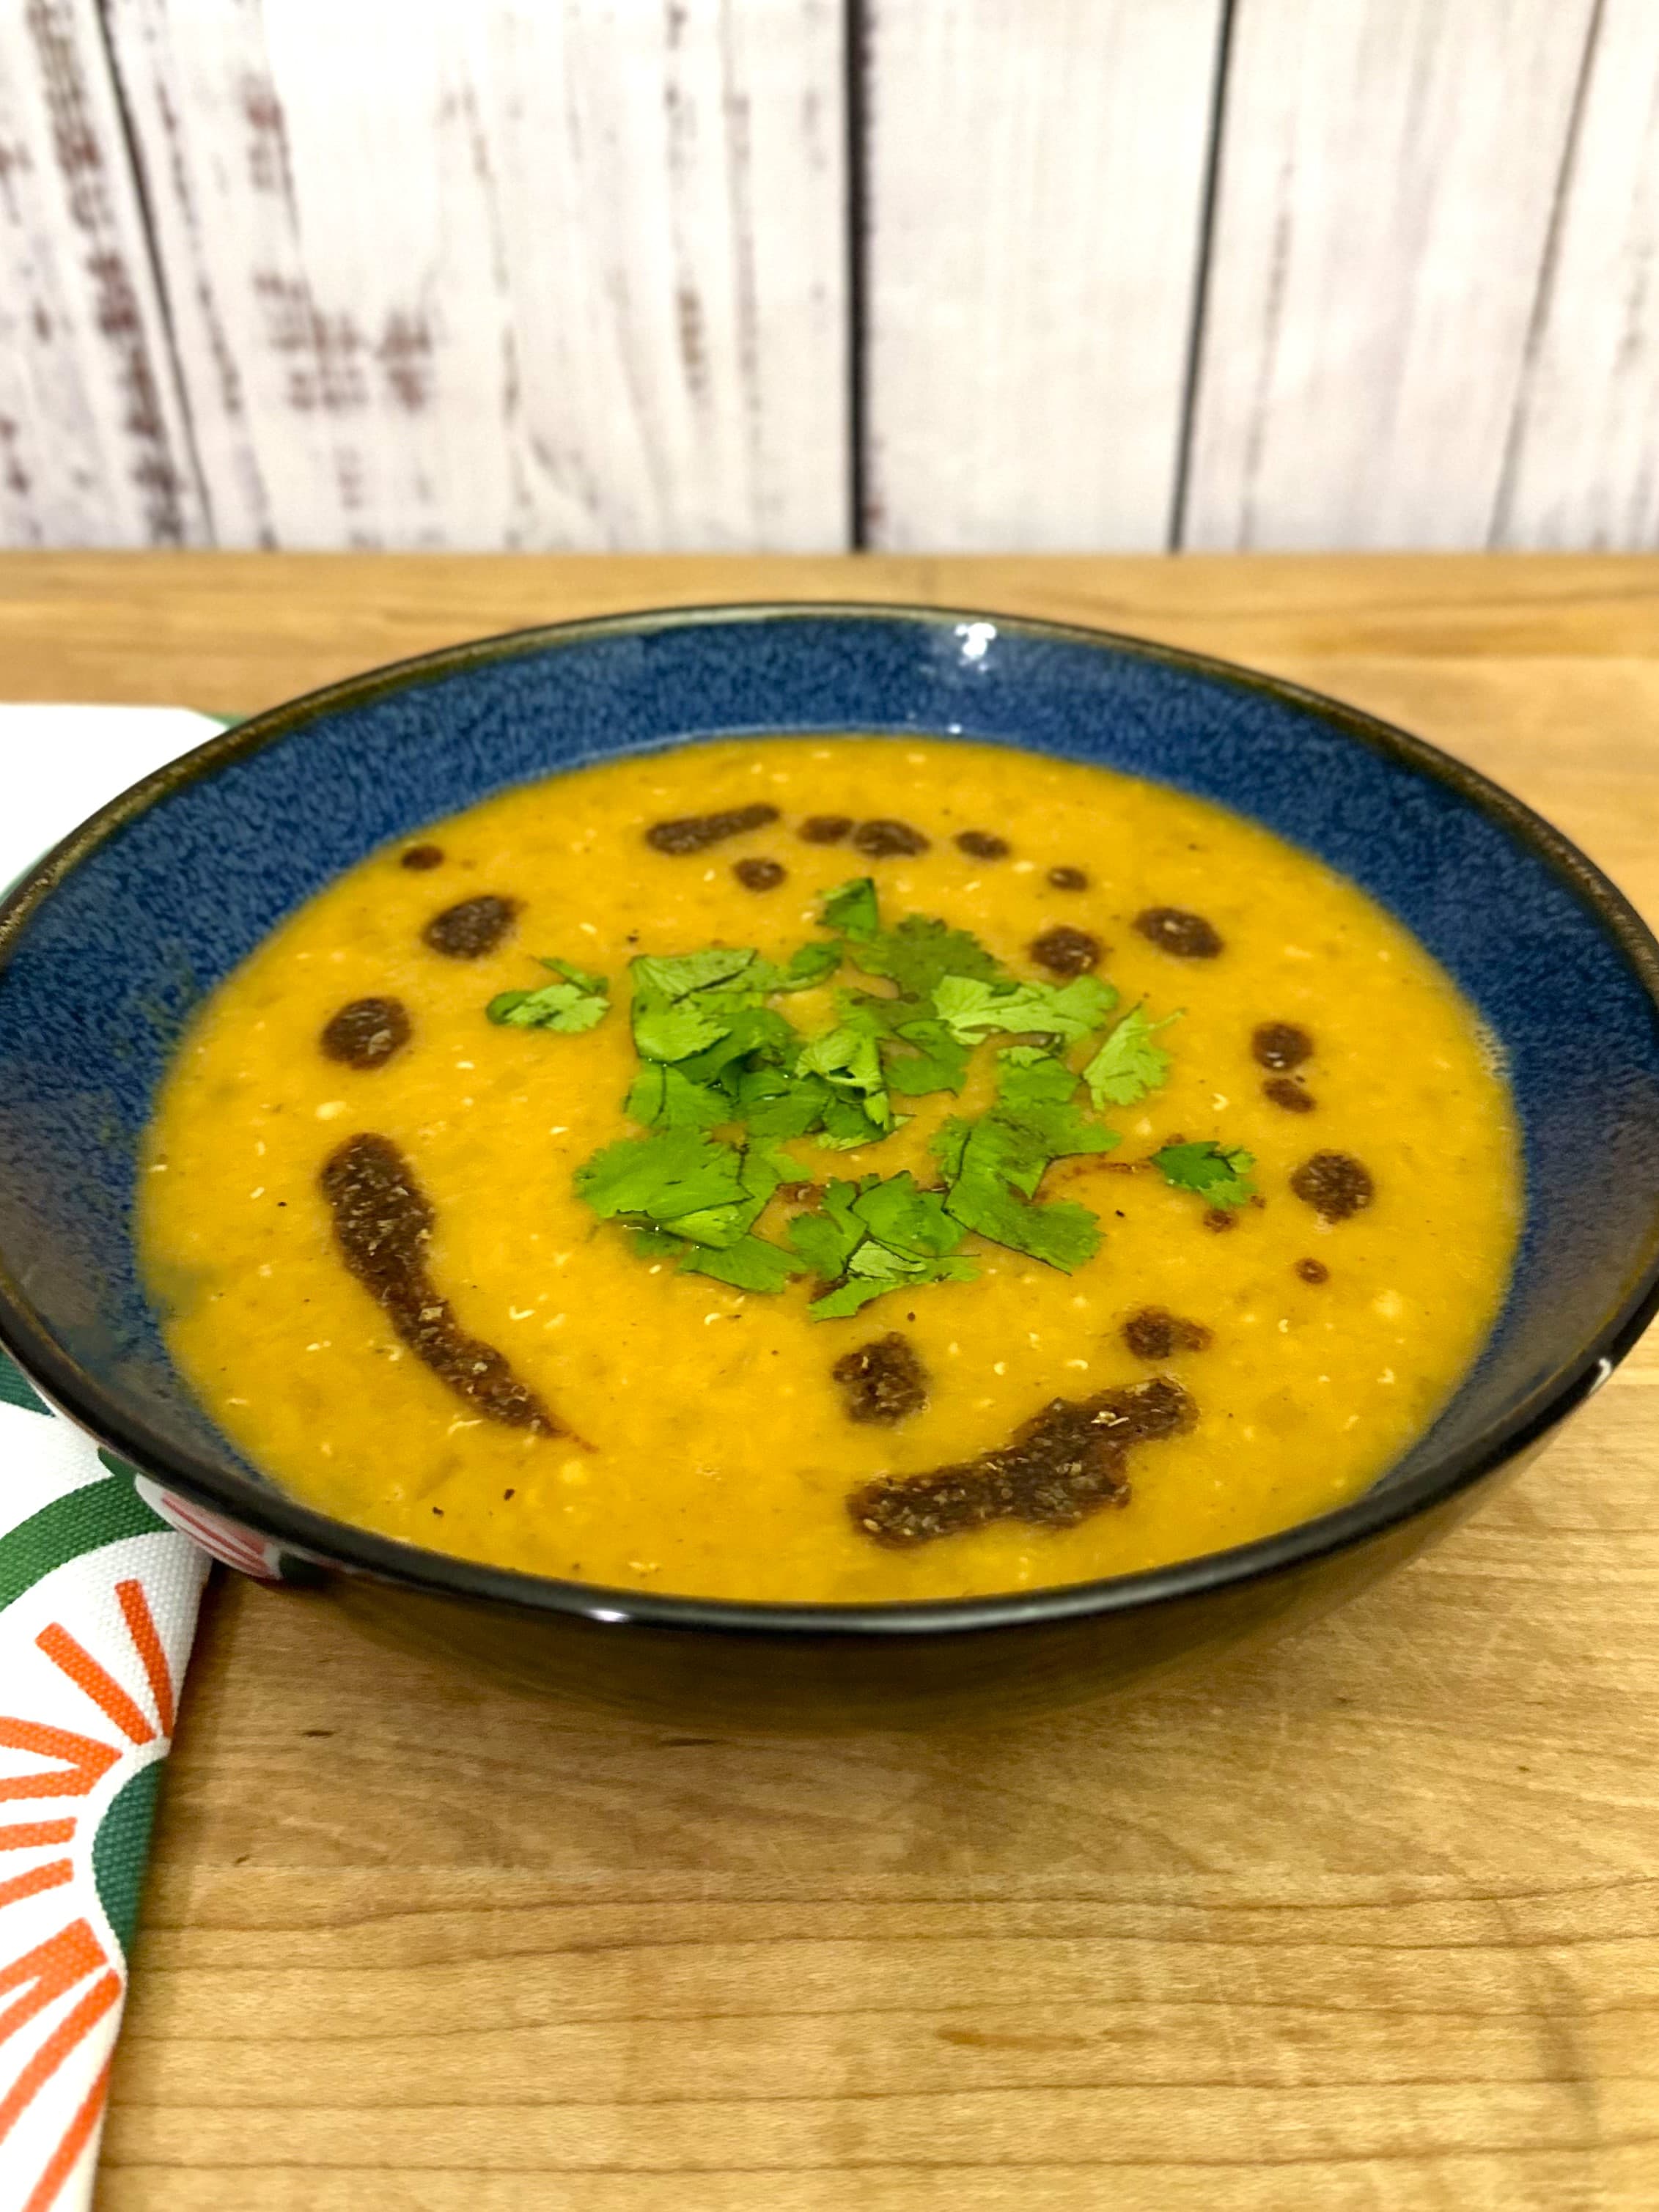 Red Lentil Soup in a blue bowl on a wooden board.